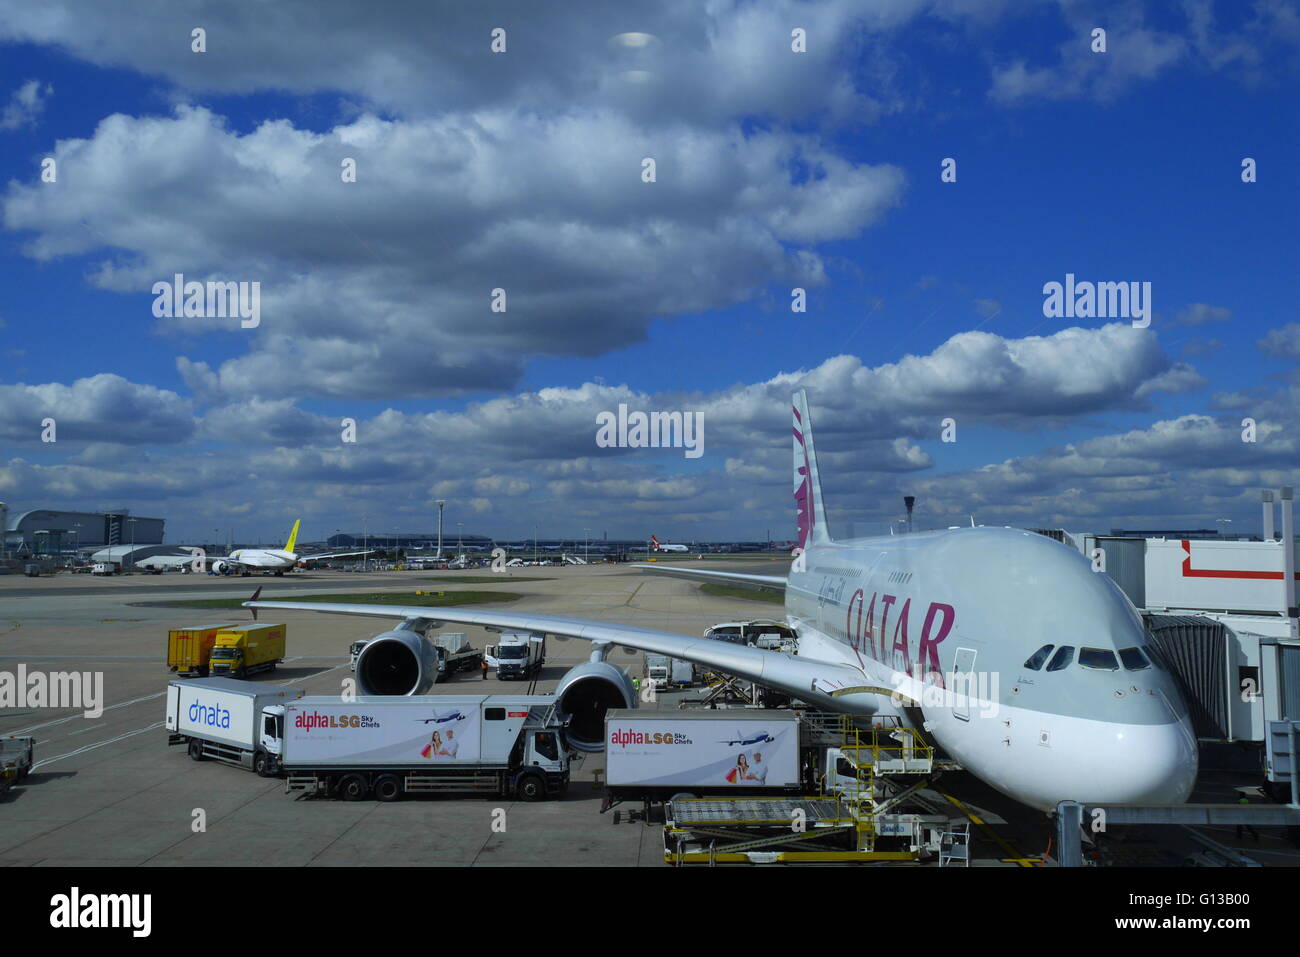 Qatar Airways Airbus A380-800 being loaded on the stand at London Heathrow Airport Stock Photo